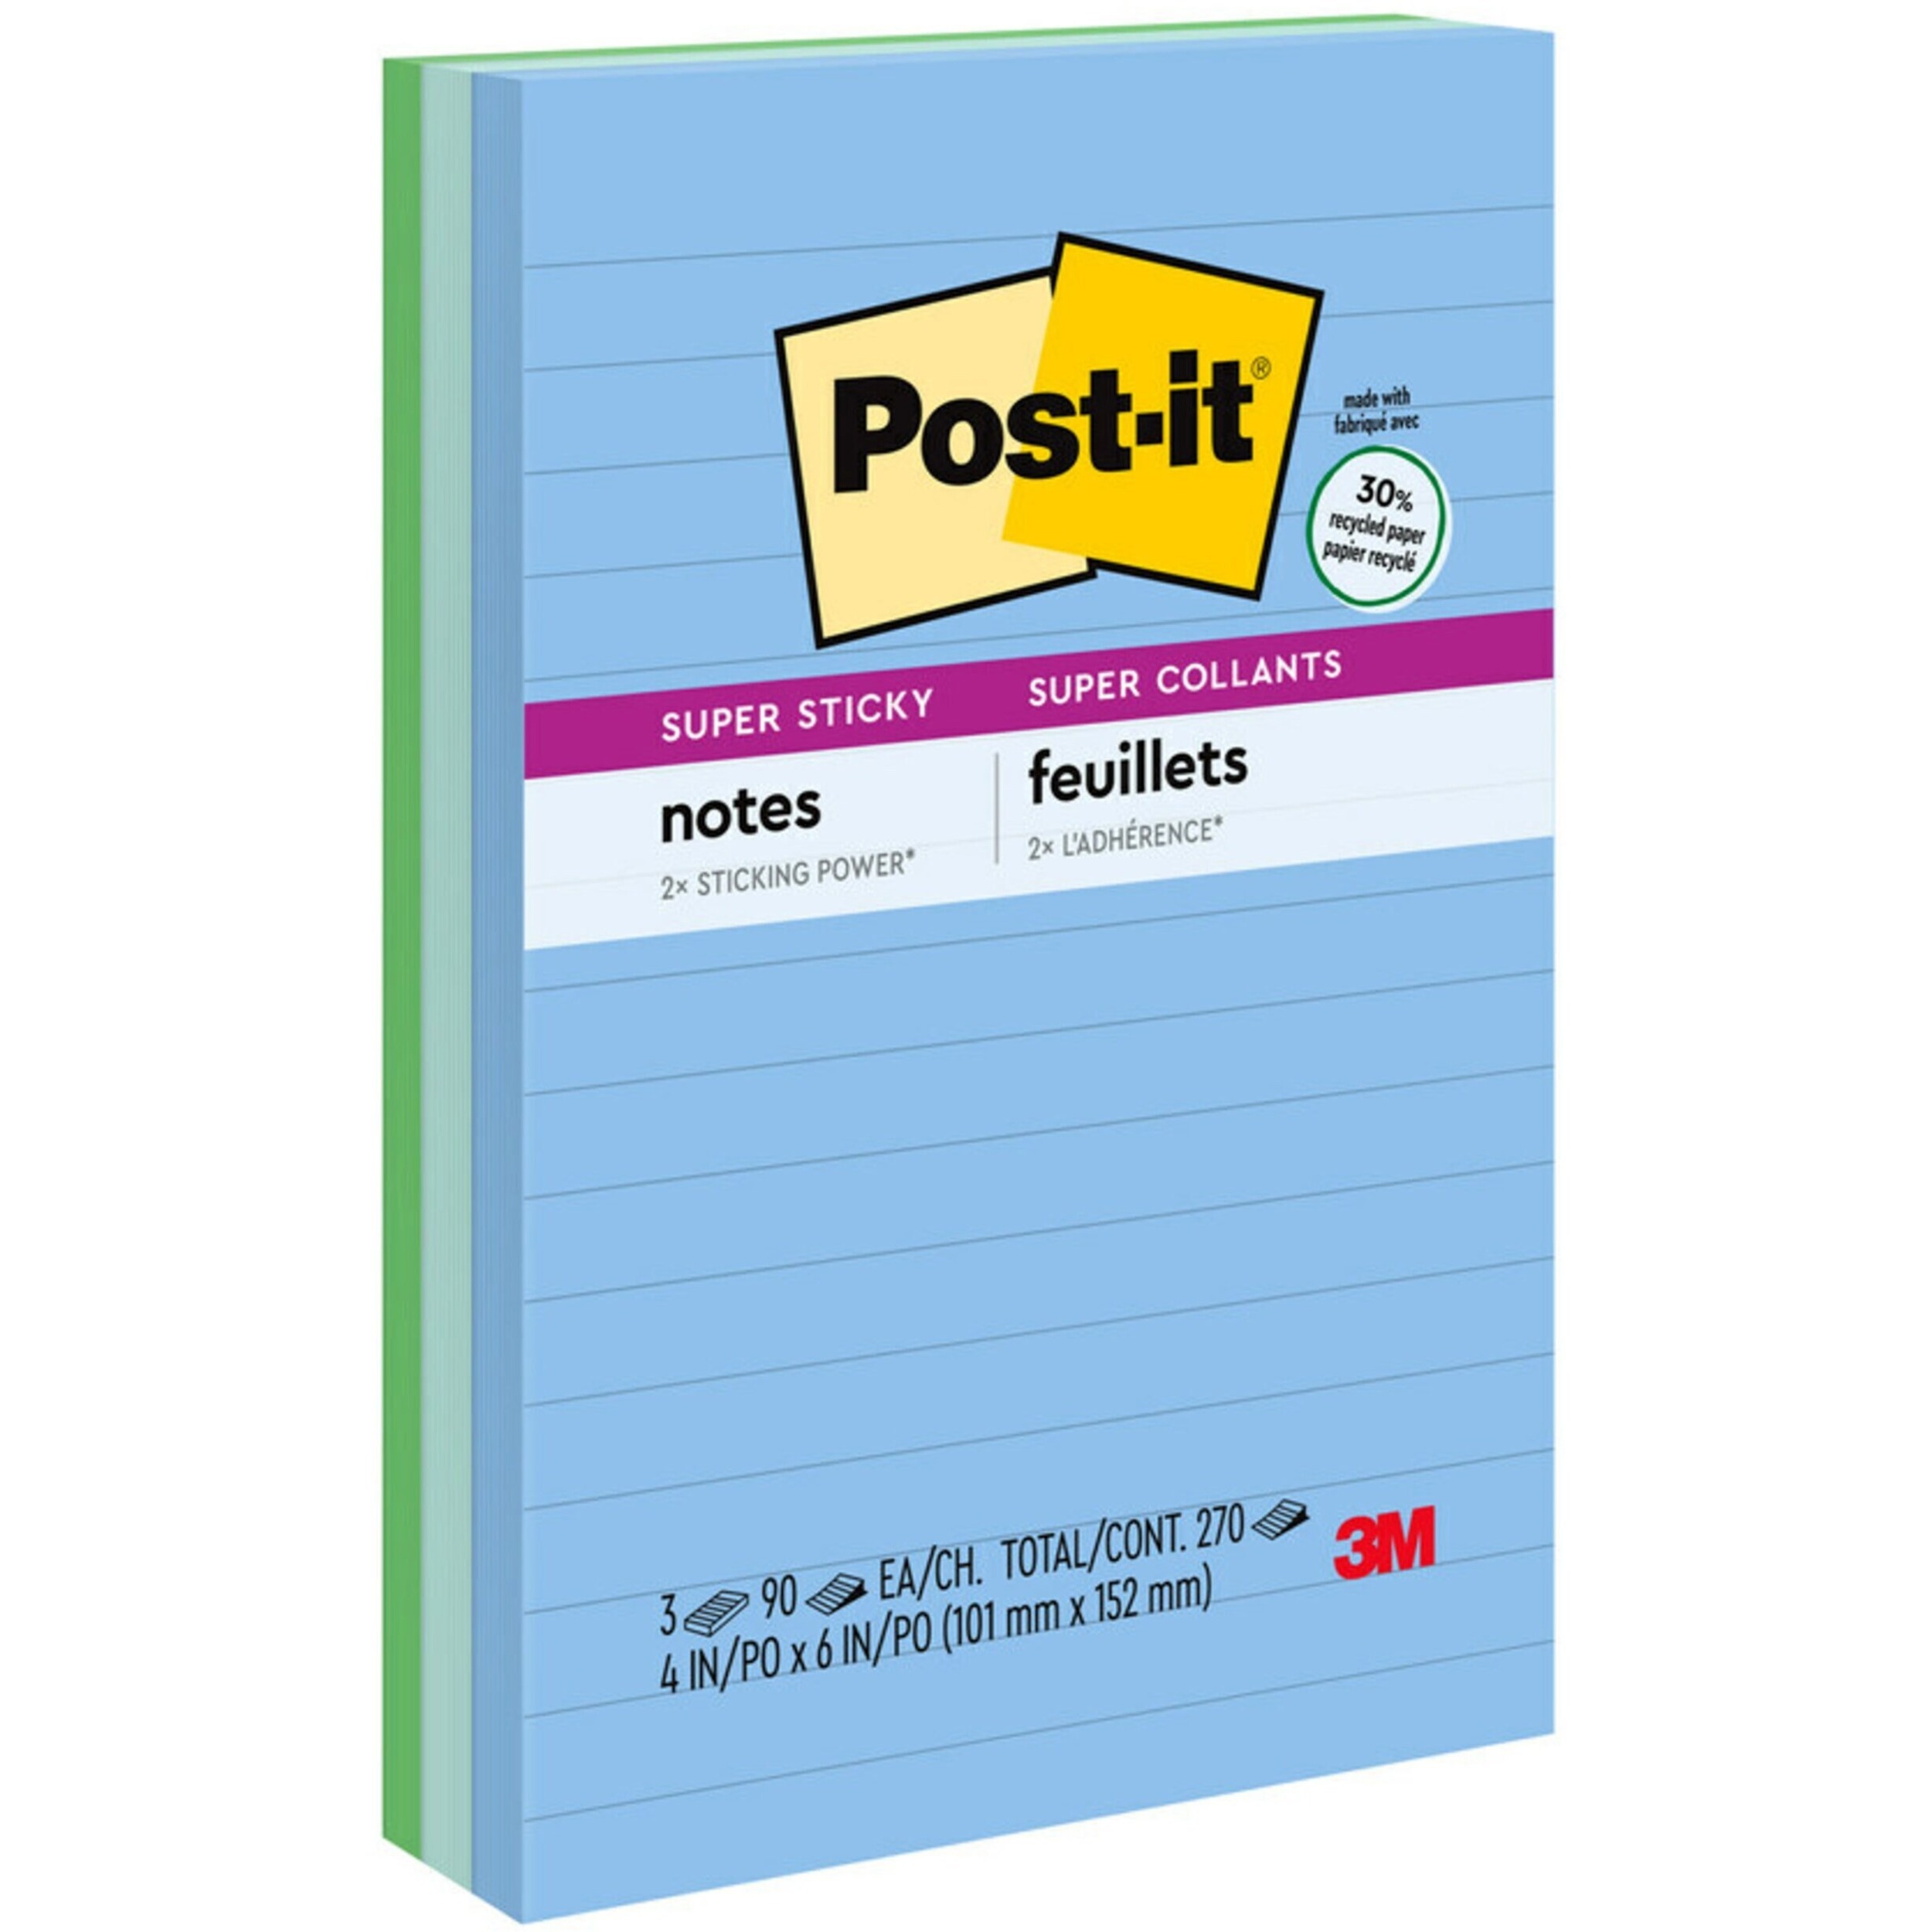 Post-it® Super Sticky Note Pads - Energy Boost Color Collection - Zerbee